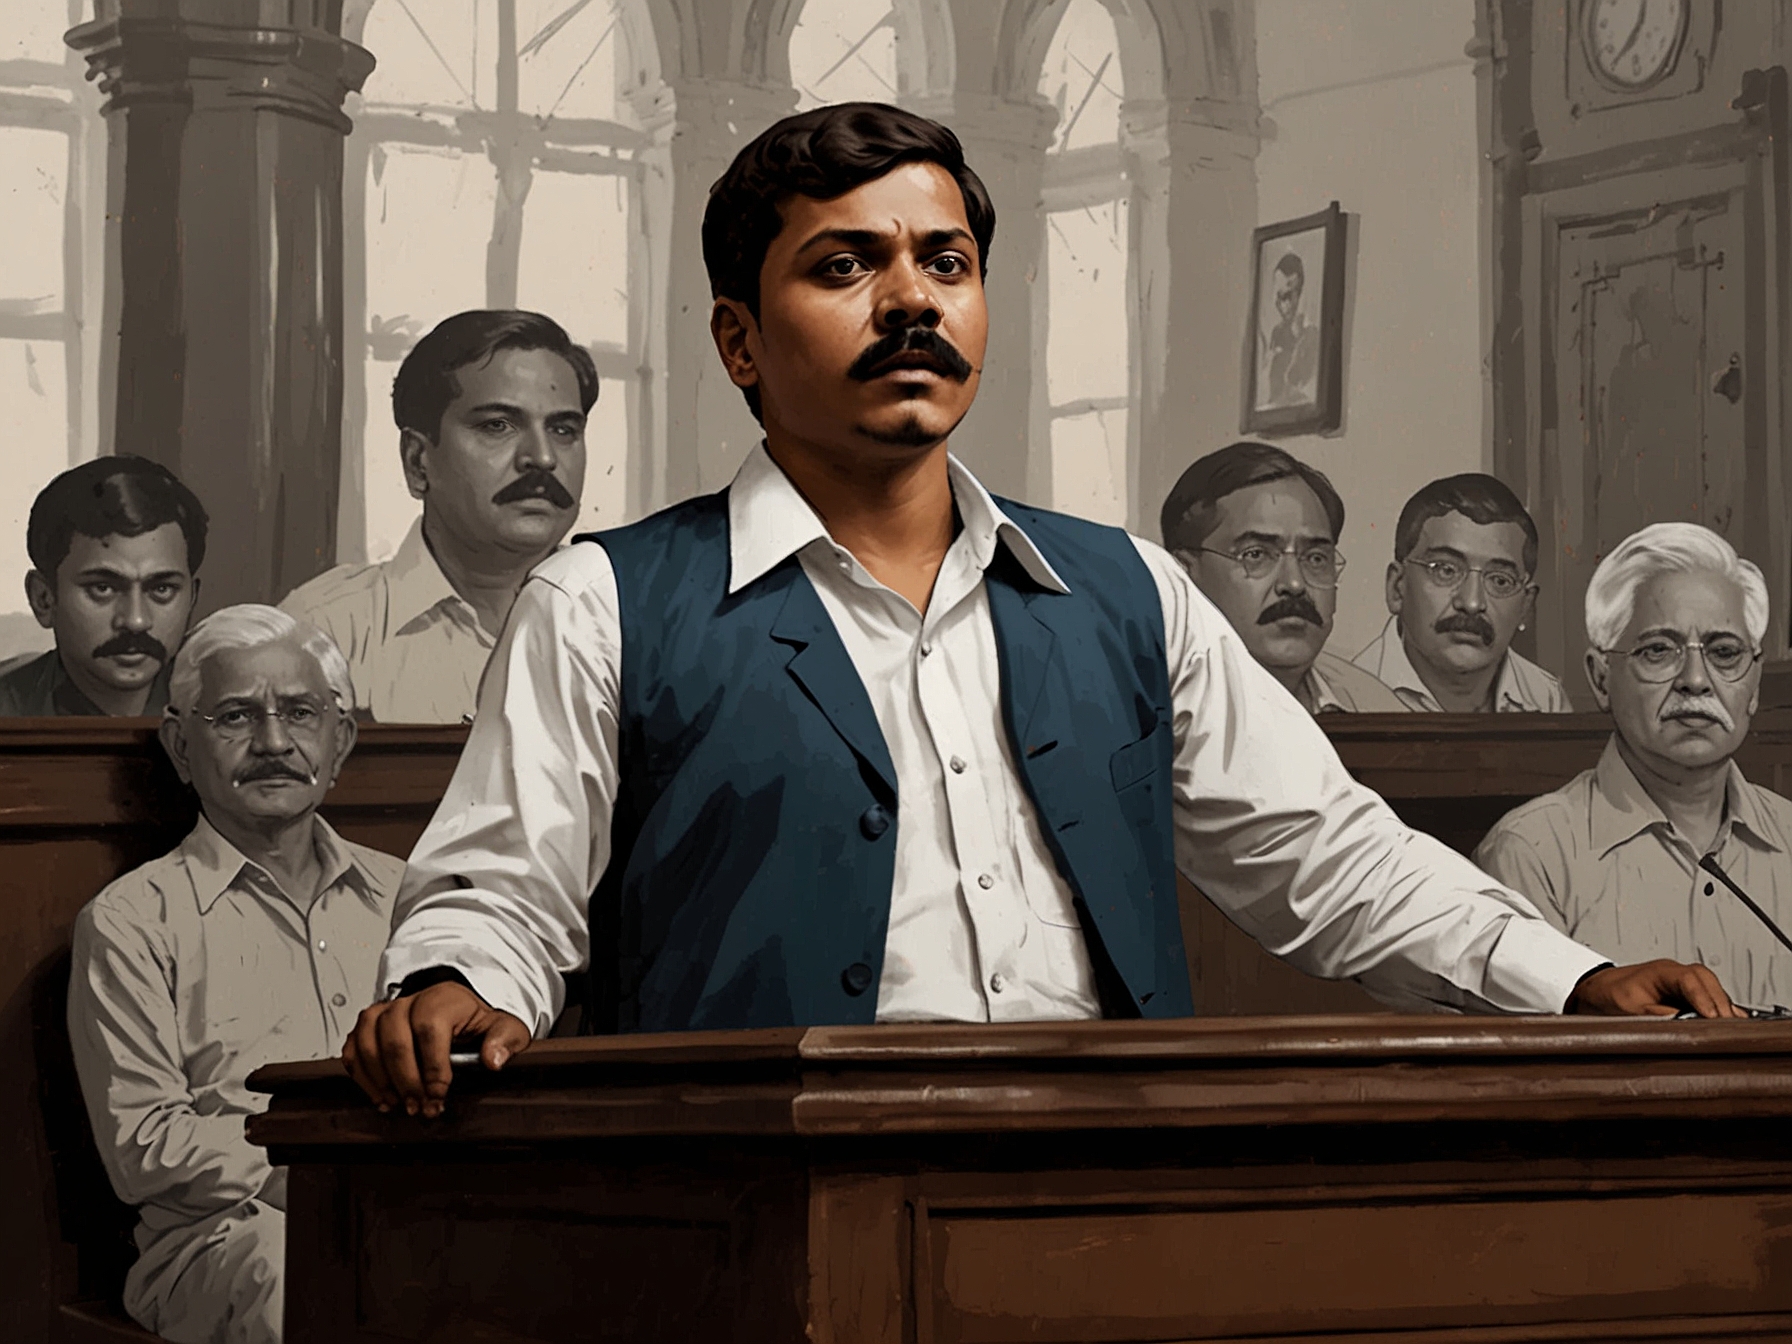 Chandrashekhar Azad delivers a fiery speech in the Lok Sabha, showing his frustration with the government's policies, as members of the Treasury bench listen attentively.